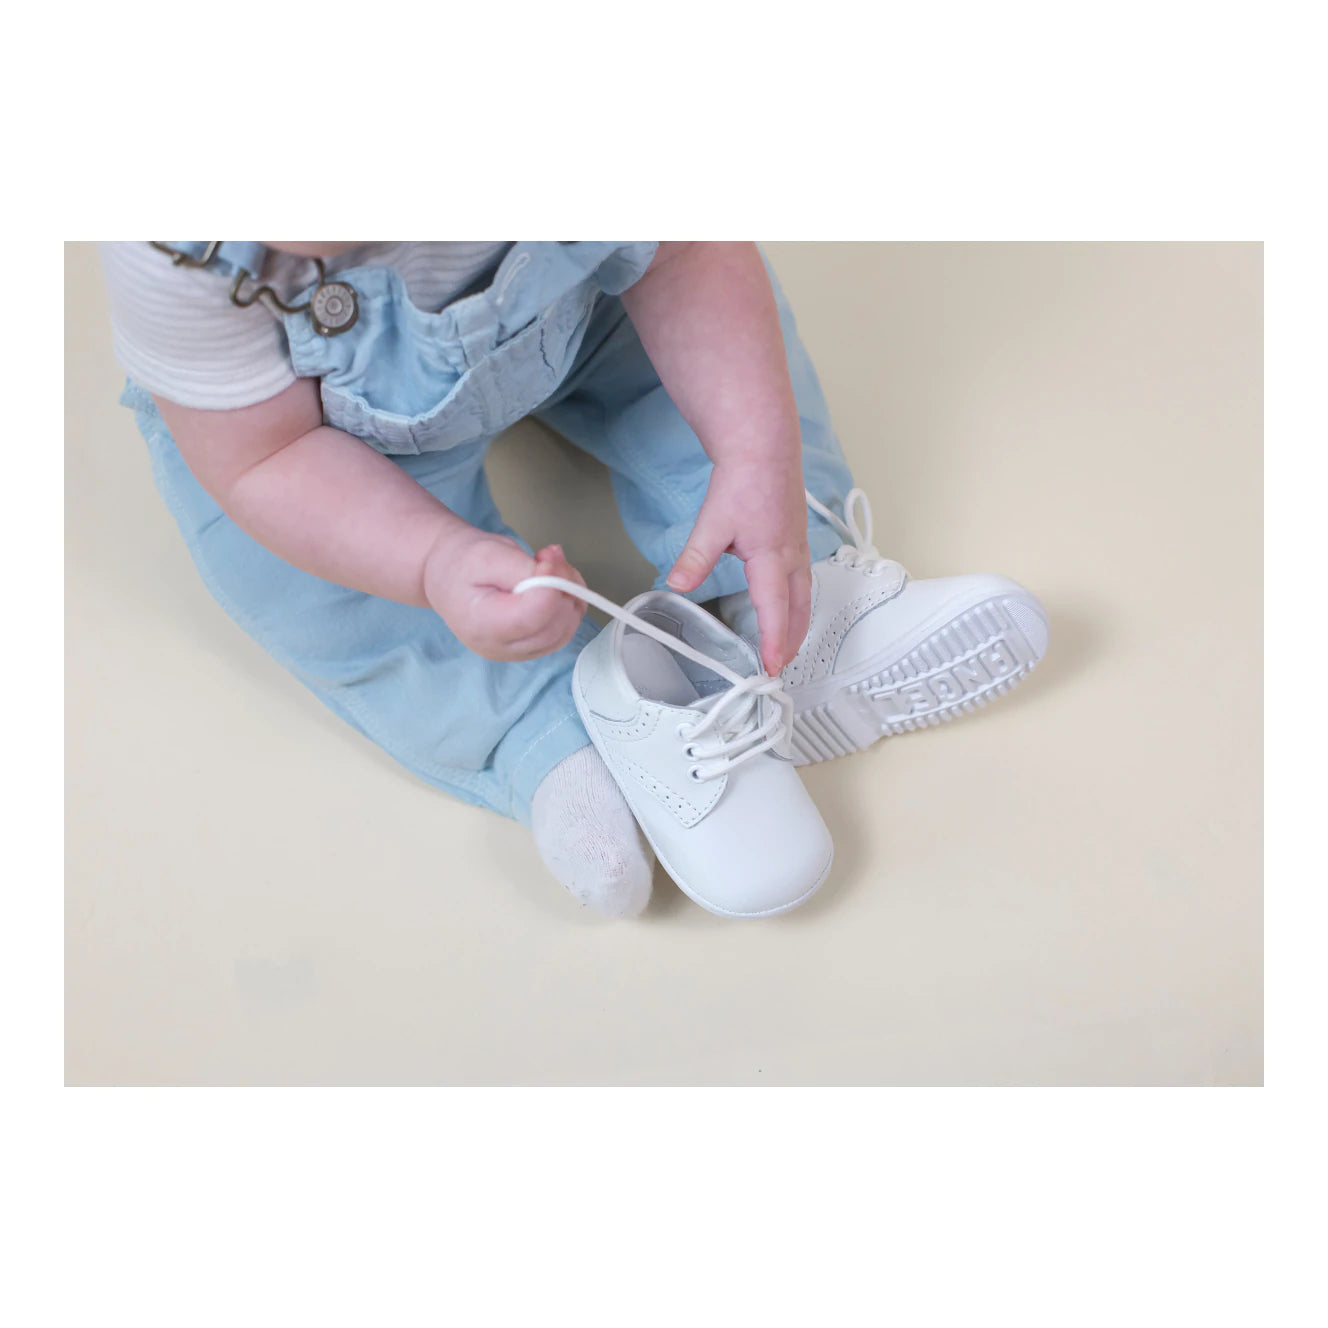 James Leather Lace Up Shoe in White  - Doodlebug's Children's Boutique